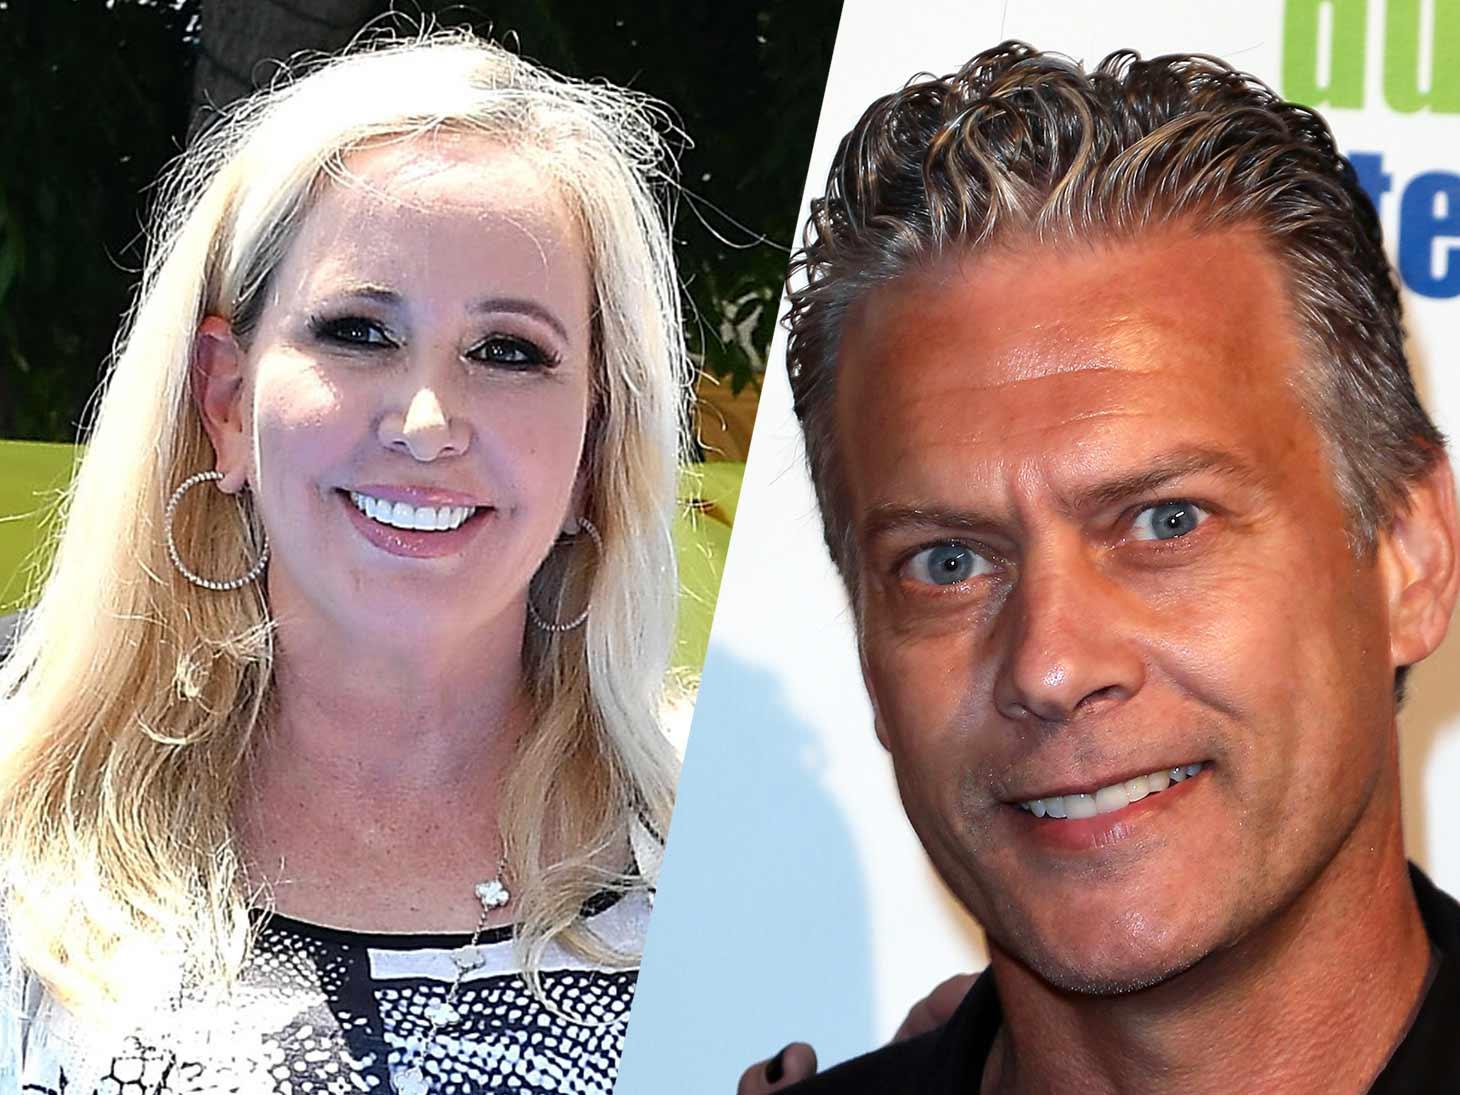 ‘RHOC’ Star Shannon Beador’s Estranged Husband Claims She Pulled in $1.4 Million Last Year